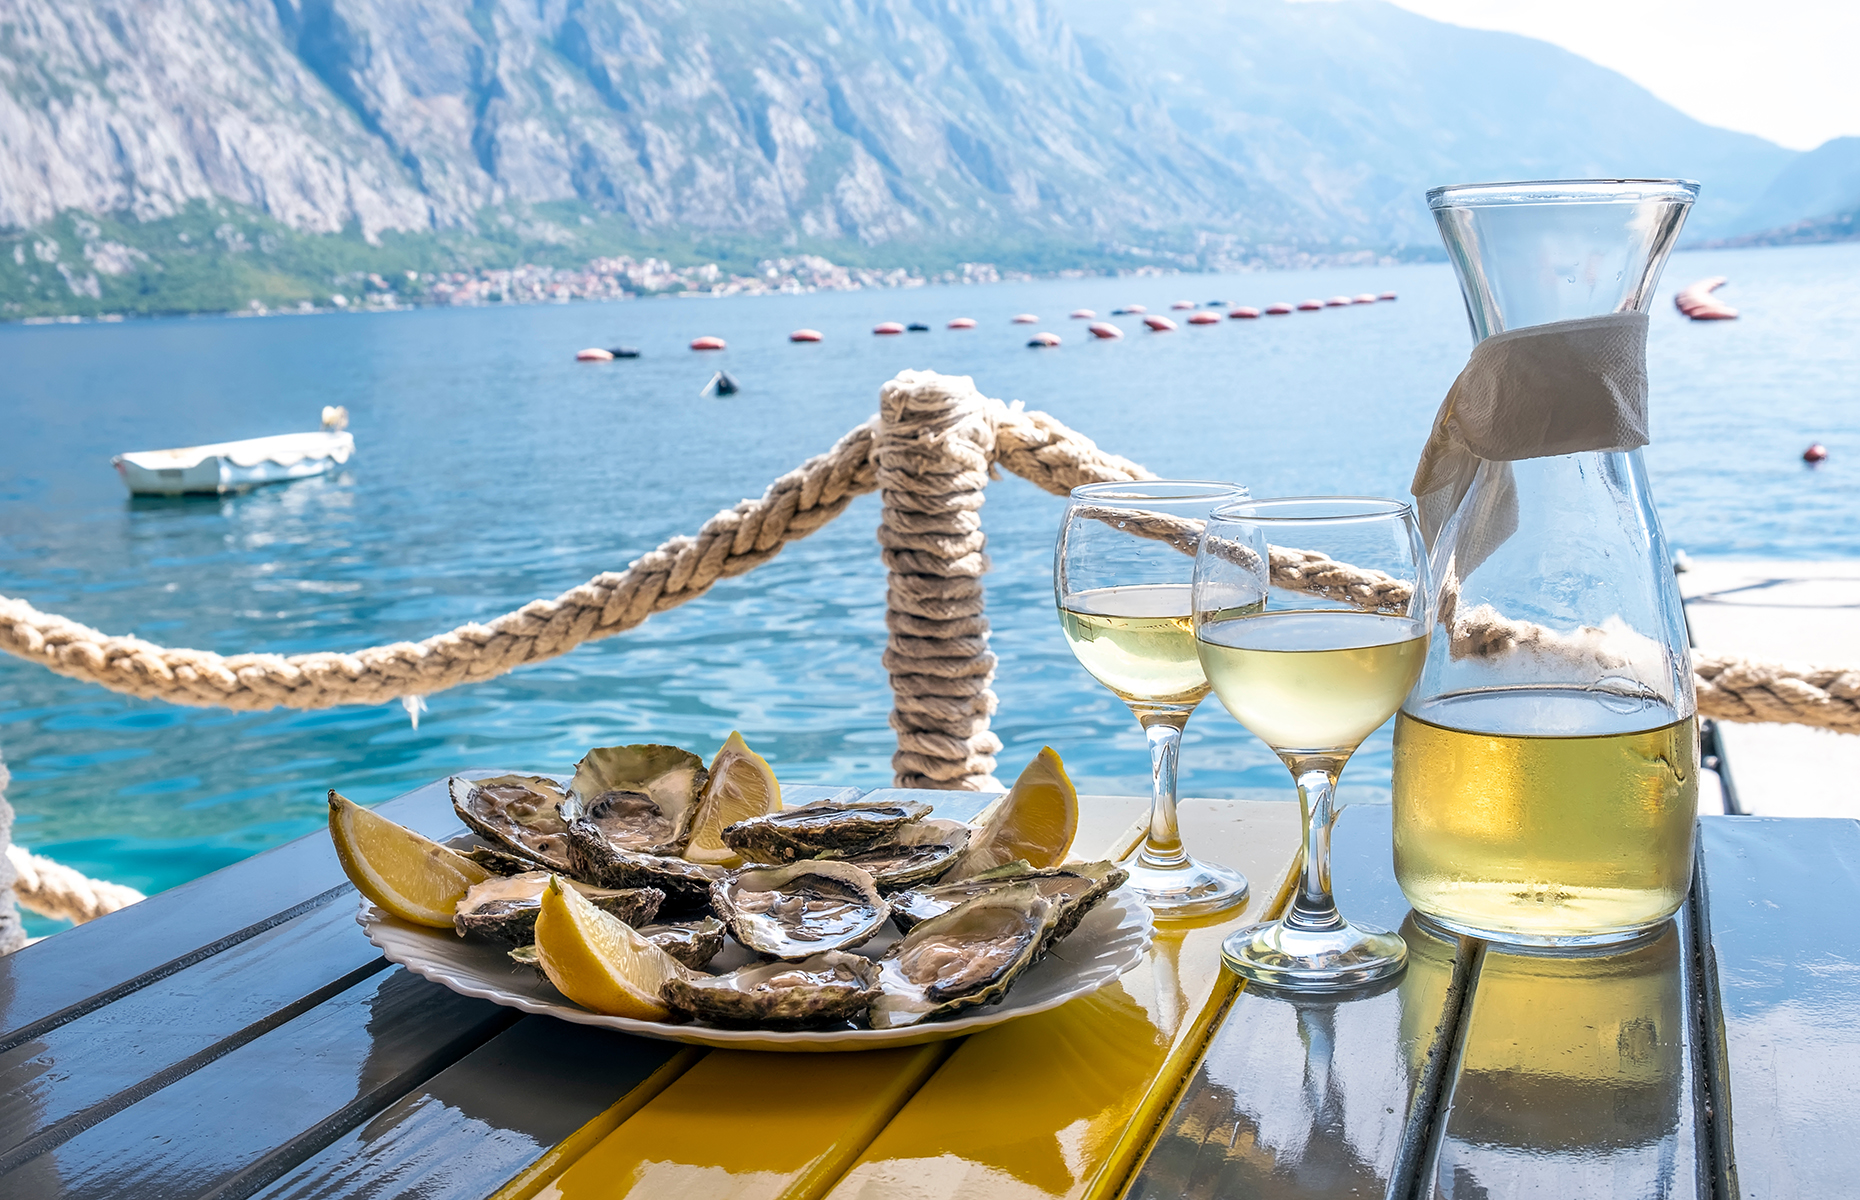 Oysters at a Montenegro restaurant. (Image: Carmian/Shutterstock)